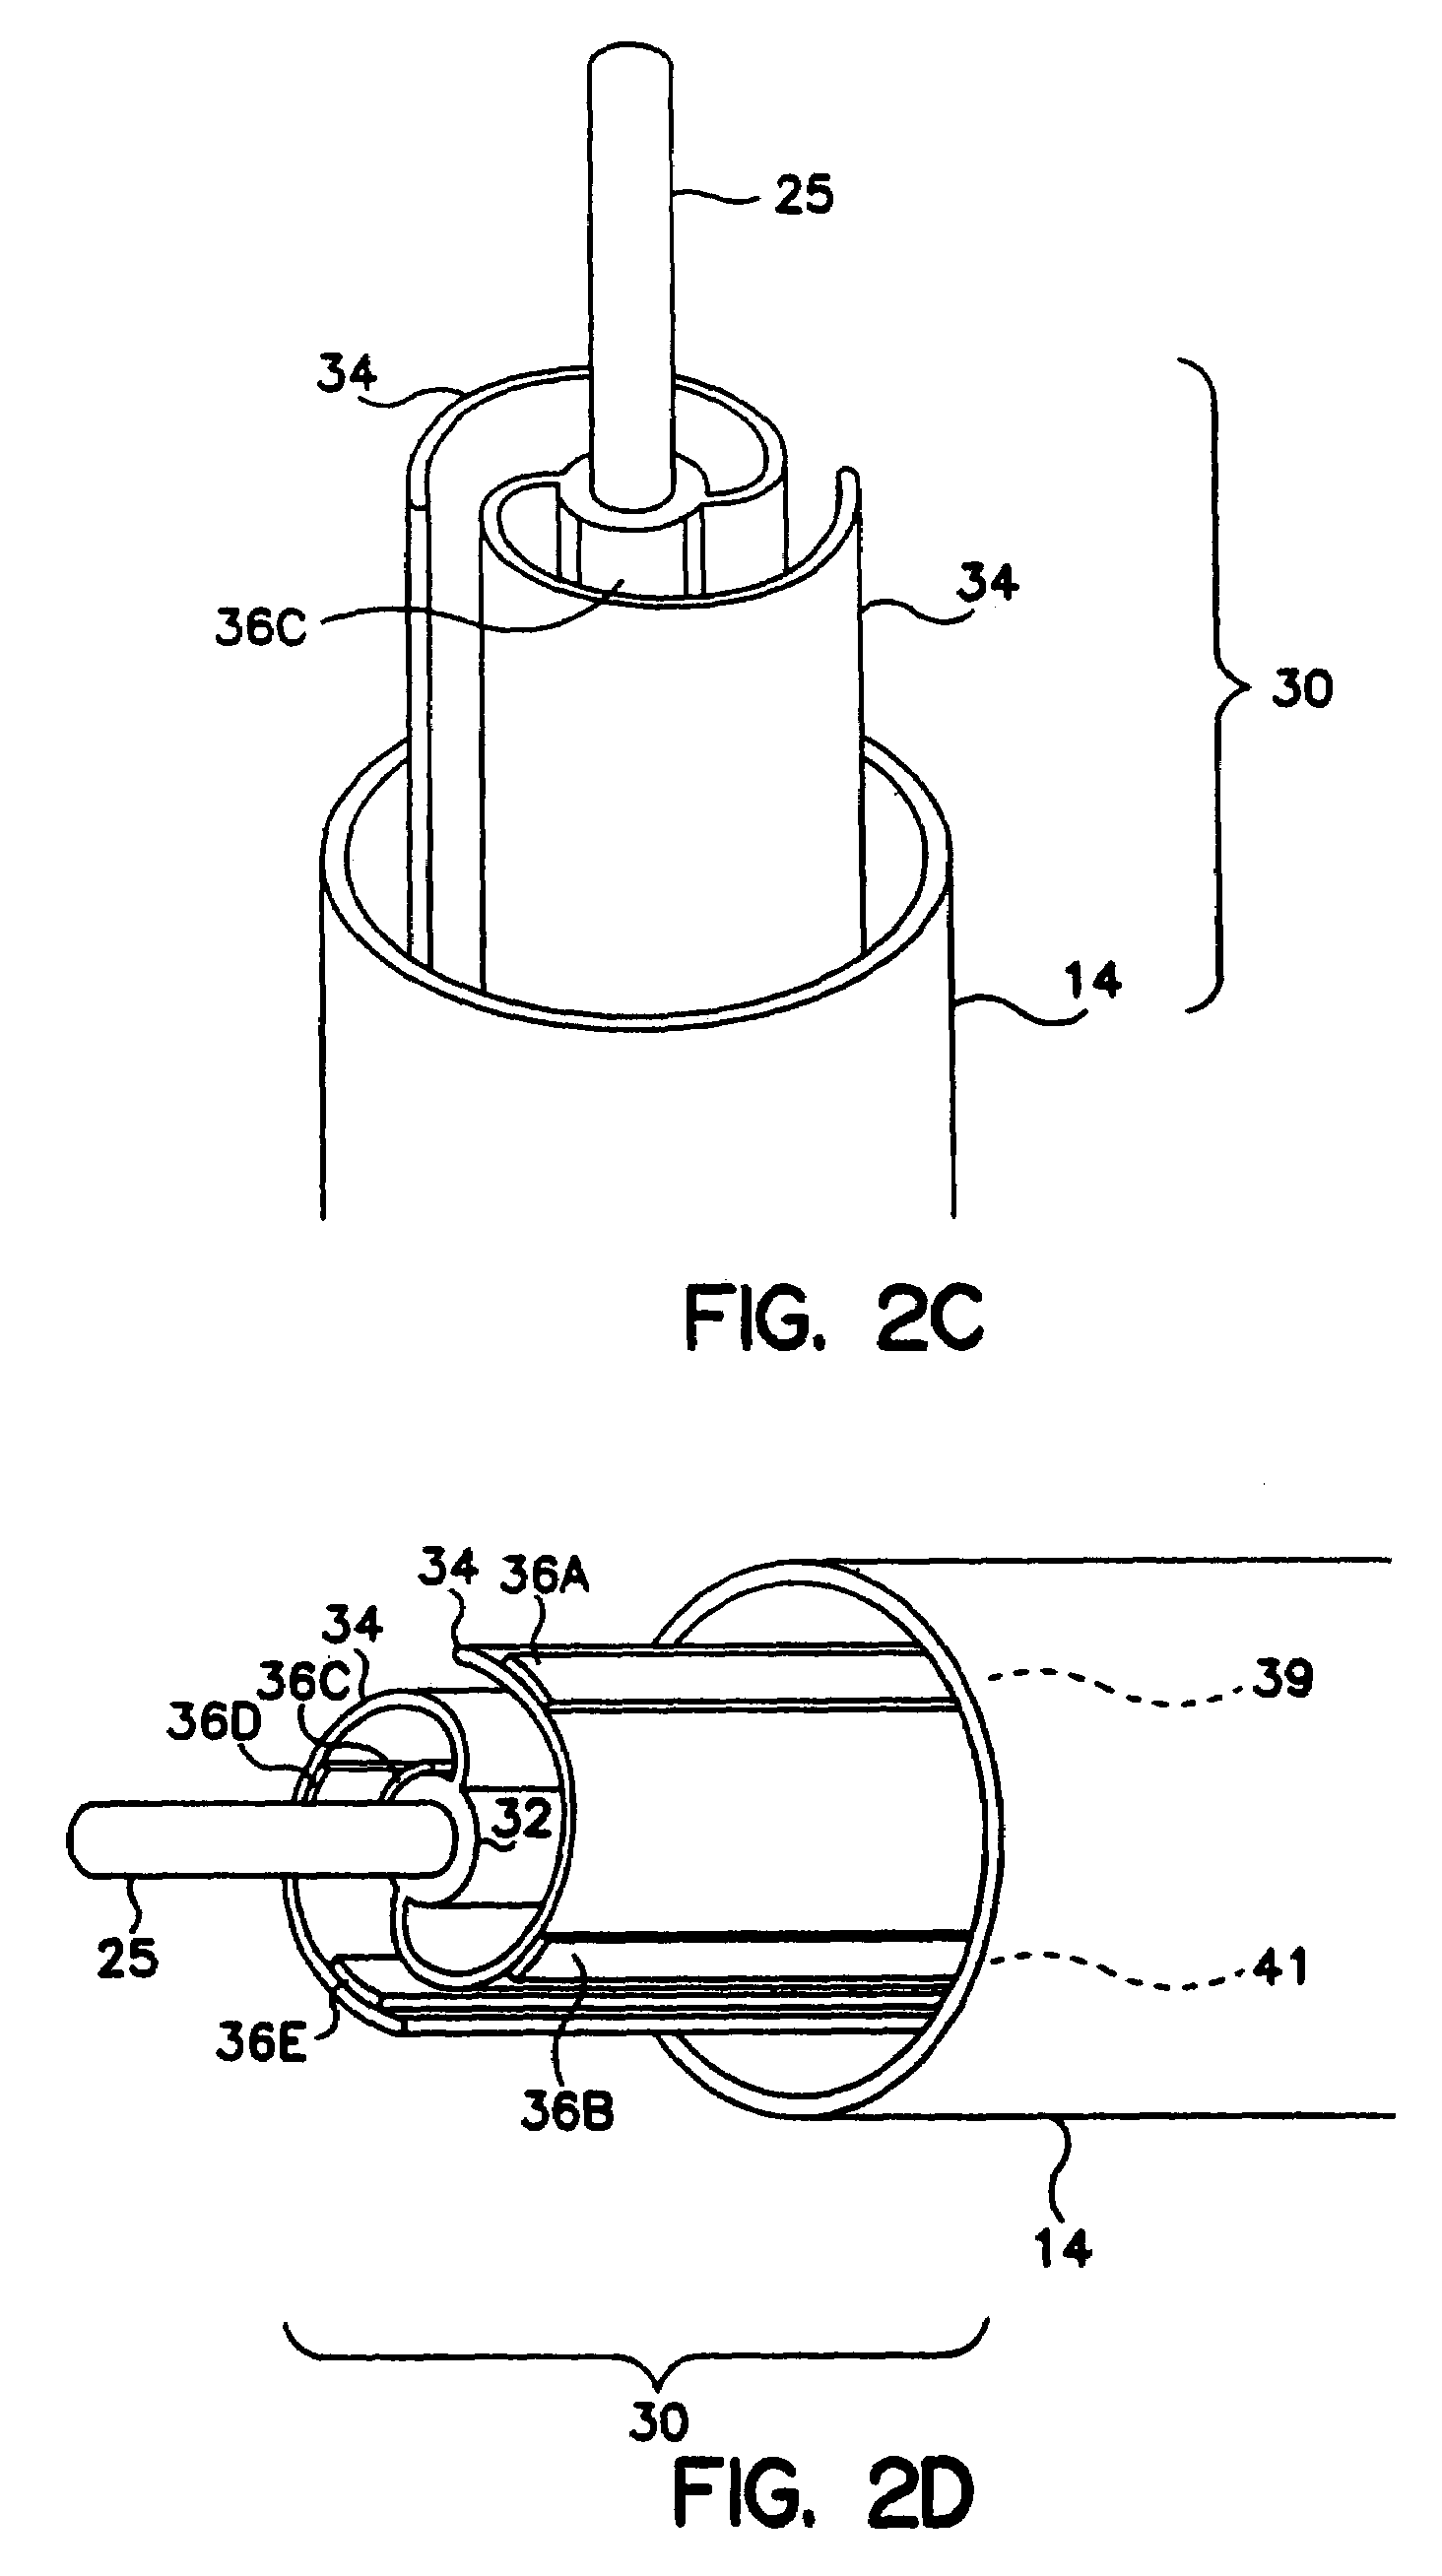 Apparatus and method for expanding a stimulation lead body in situ